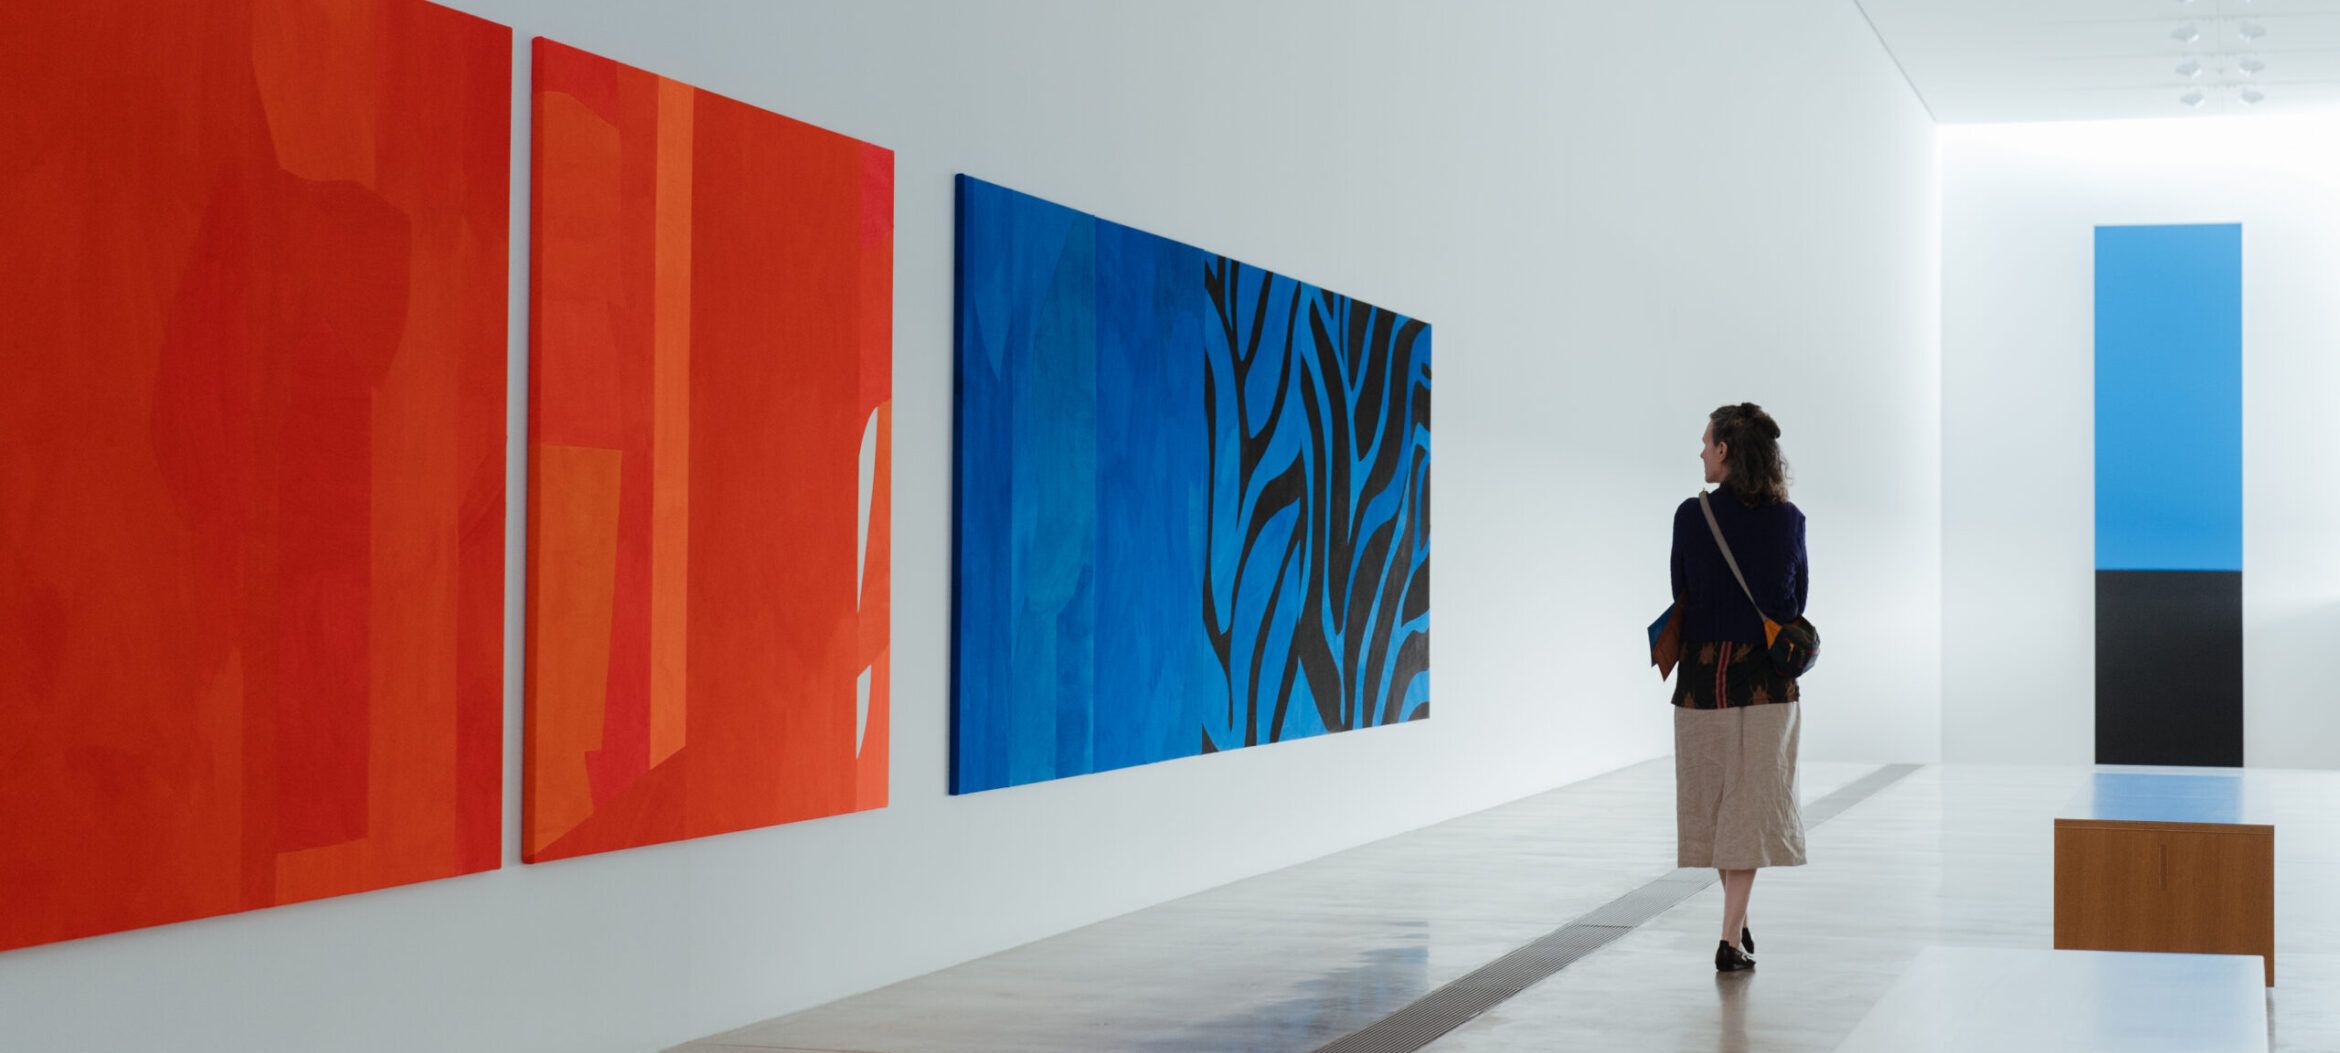 Woman looking at orange and blue Sarah Crowner painting with Ellsworth Kelly's Blue Black painting in the background.